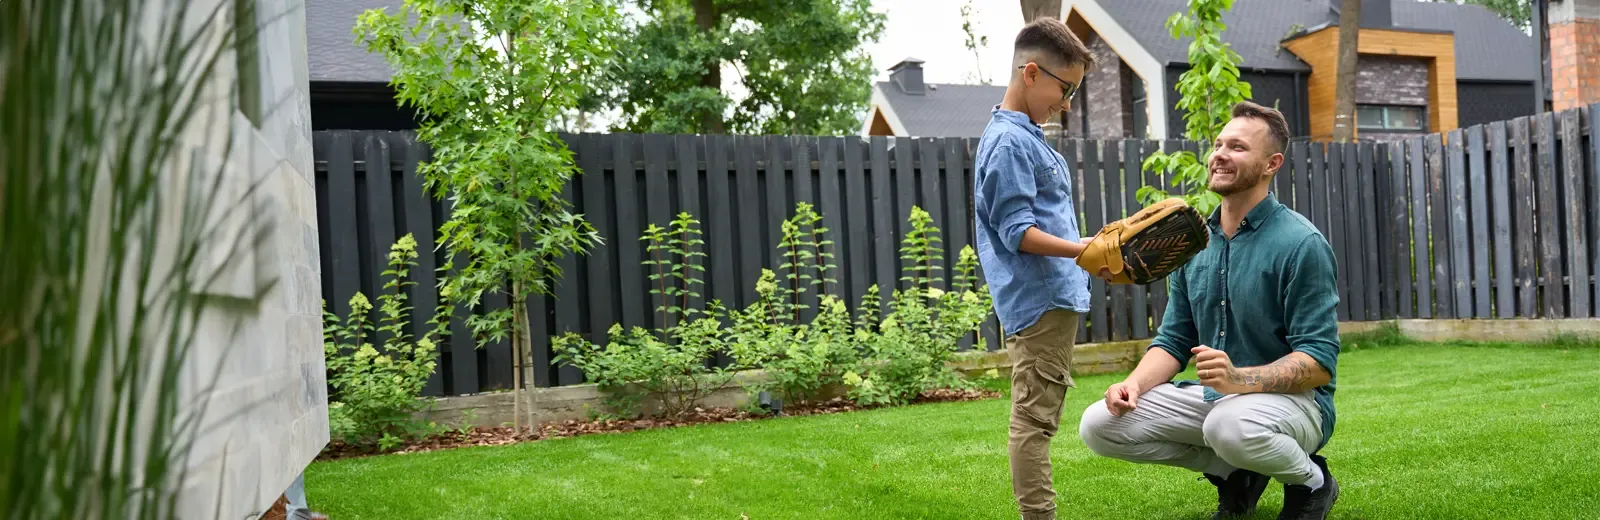 father and son playing catch in back yard